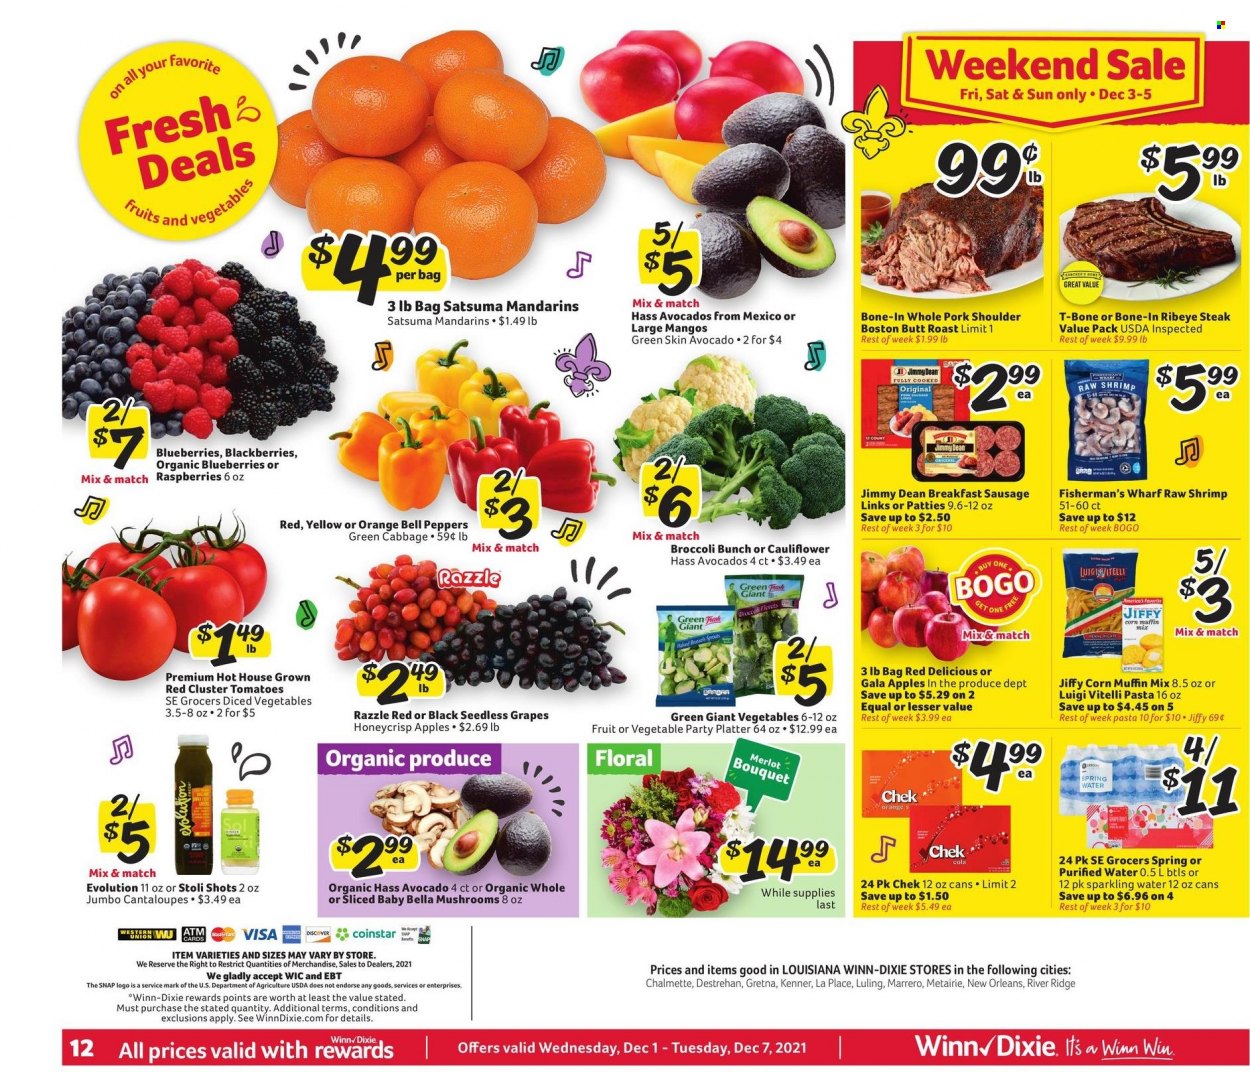 thumbnail - Winn Dixie Flyer - 12/01/2021 - 12/07/2021 - Sales products - mushrooms, seedless grapes, muffin mix, broccoli, cabbage, cantaloupe, cauliflower, corn, tomatoes, peppers, apples, avocado, blackberries, blueberries, Gala, grapes, mandarines, Red Delicious apples, oranges, shrimps, pasta, Jimmy Dean, sausage, corn muffin, spring water, sparkling water, purified water, red wine, wine, Merlot, beef meat, beef steak, t-bone steak, steak, bone-in ribeye, ribeye steak, pork meat, pork shoulder. Page 23.